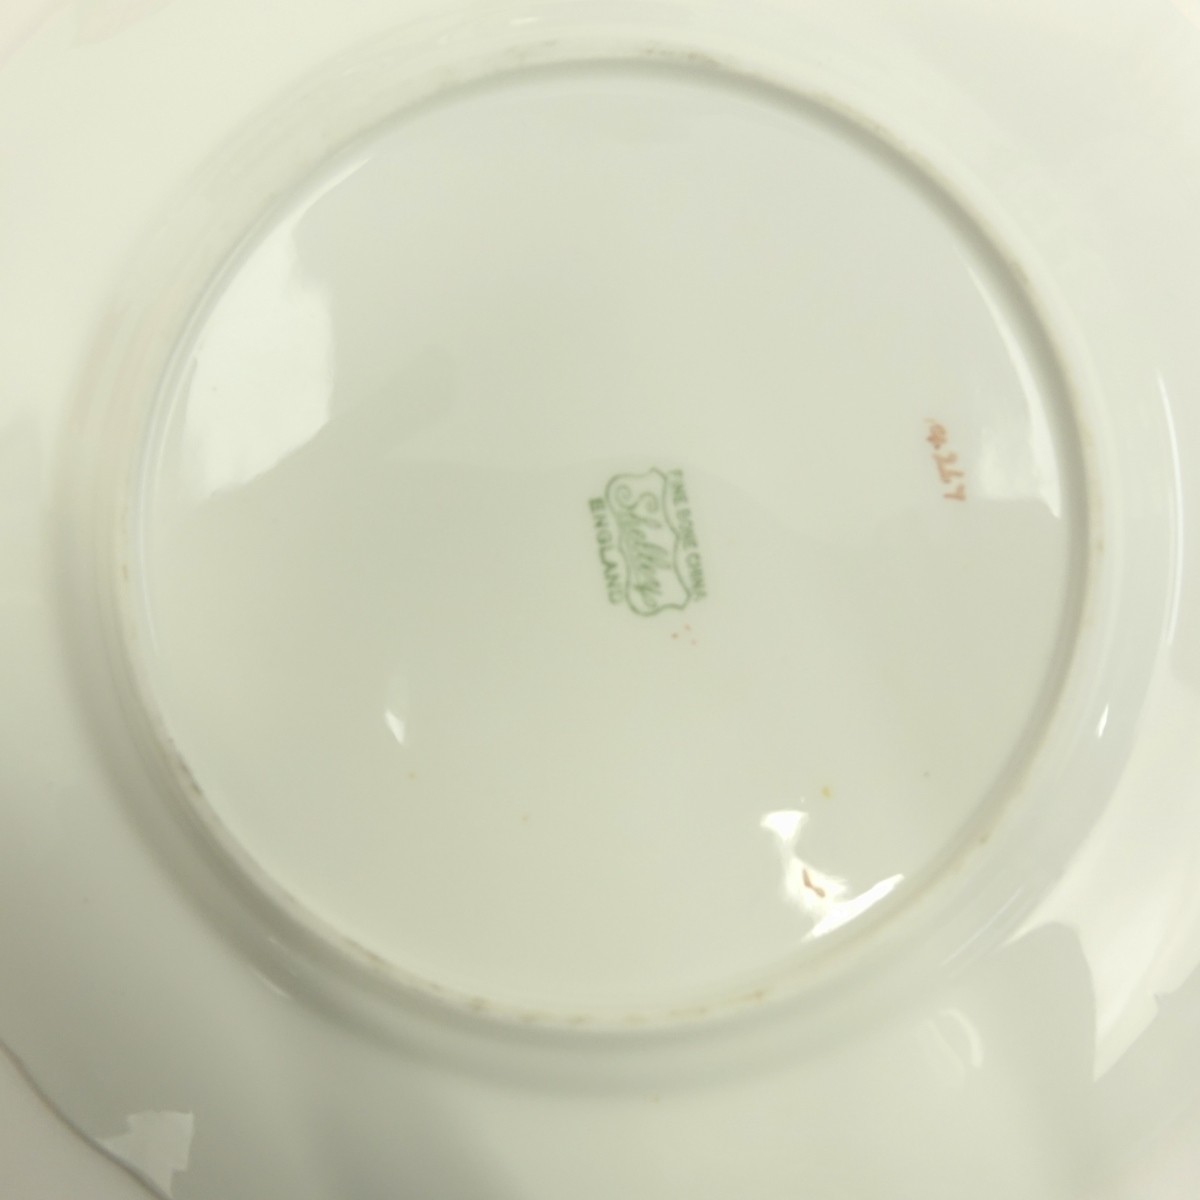 Four English Porcelain 3 Piece Cup And Saucer Sets